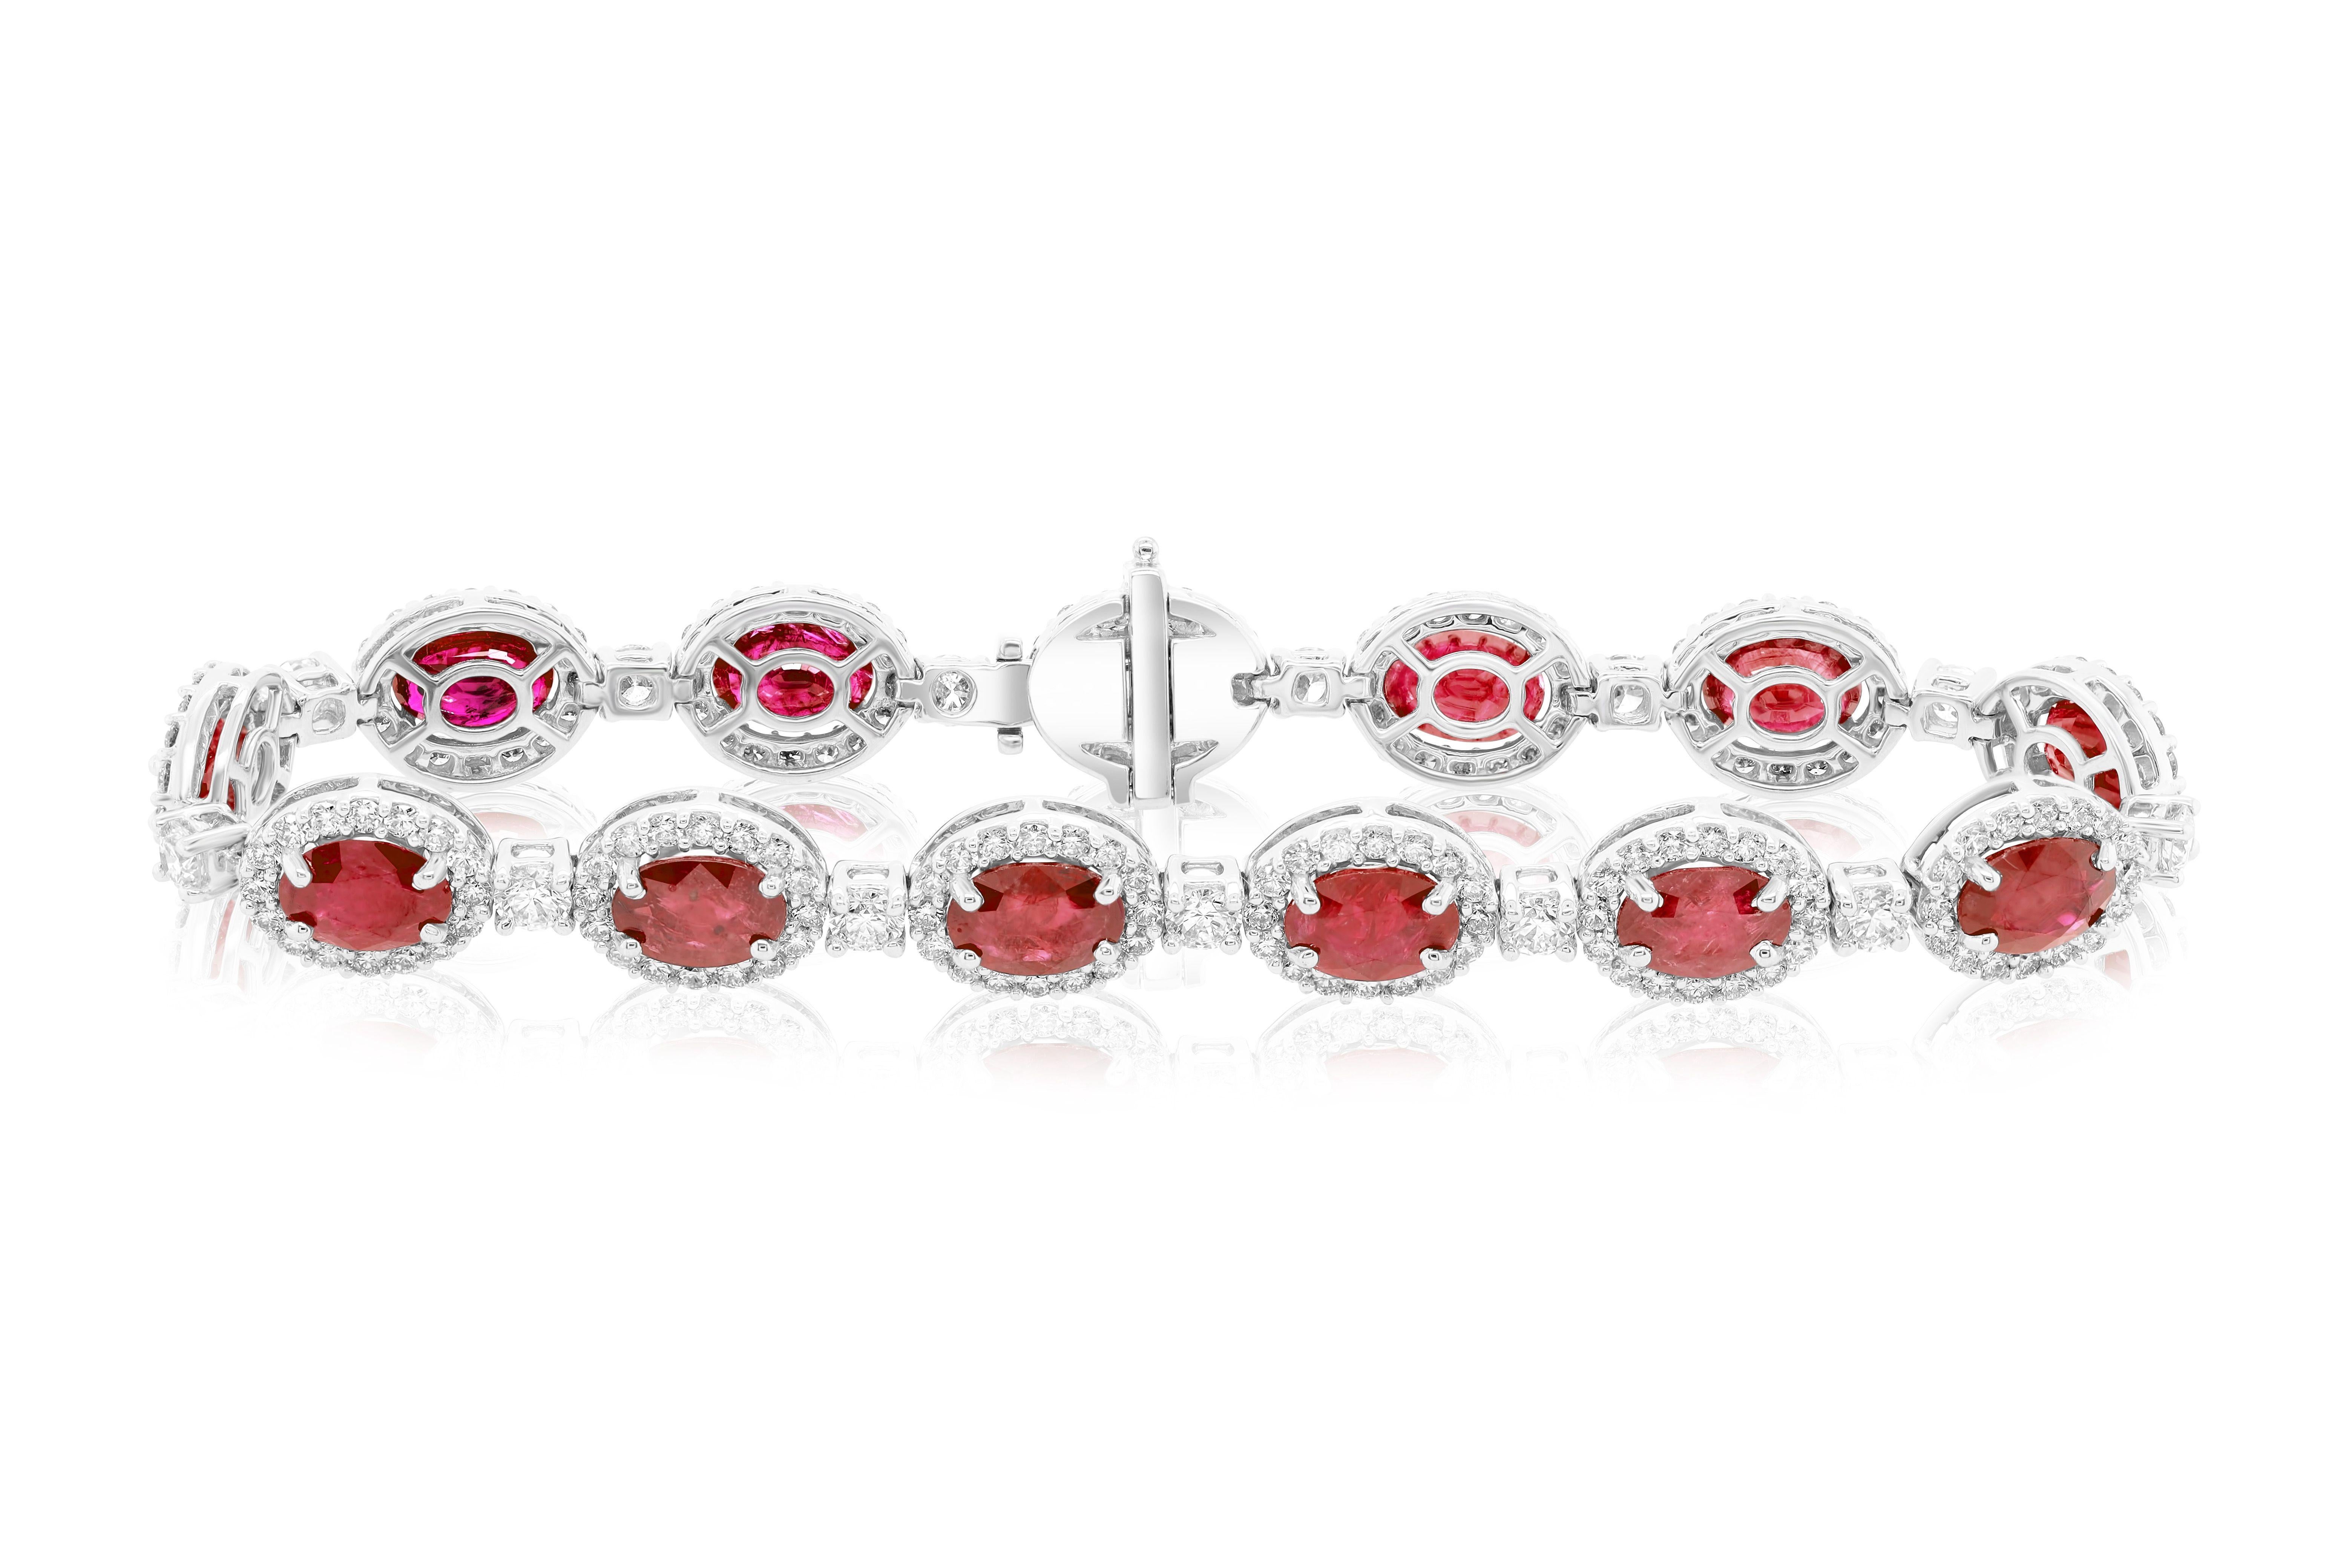 18 kt white gold bracelet adorned with 12.77 cts tw of oval cut rubies surrounded and separated by 4.08 cts tw of diamonds